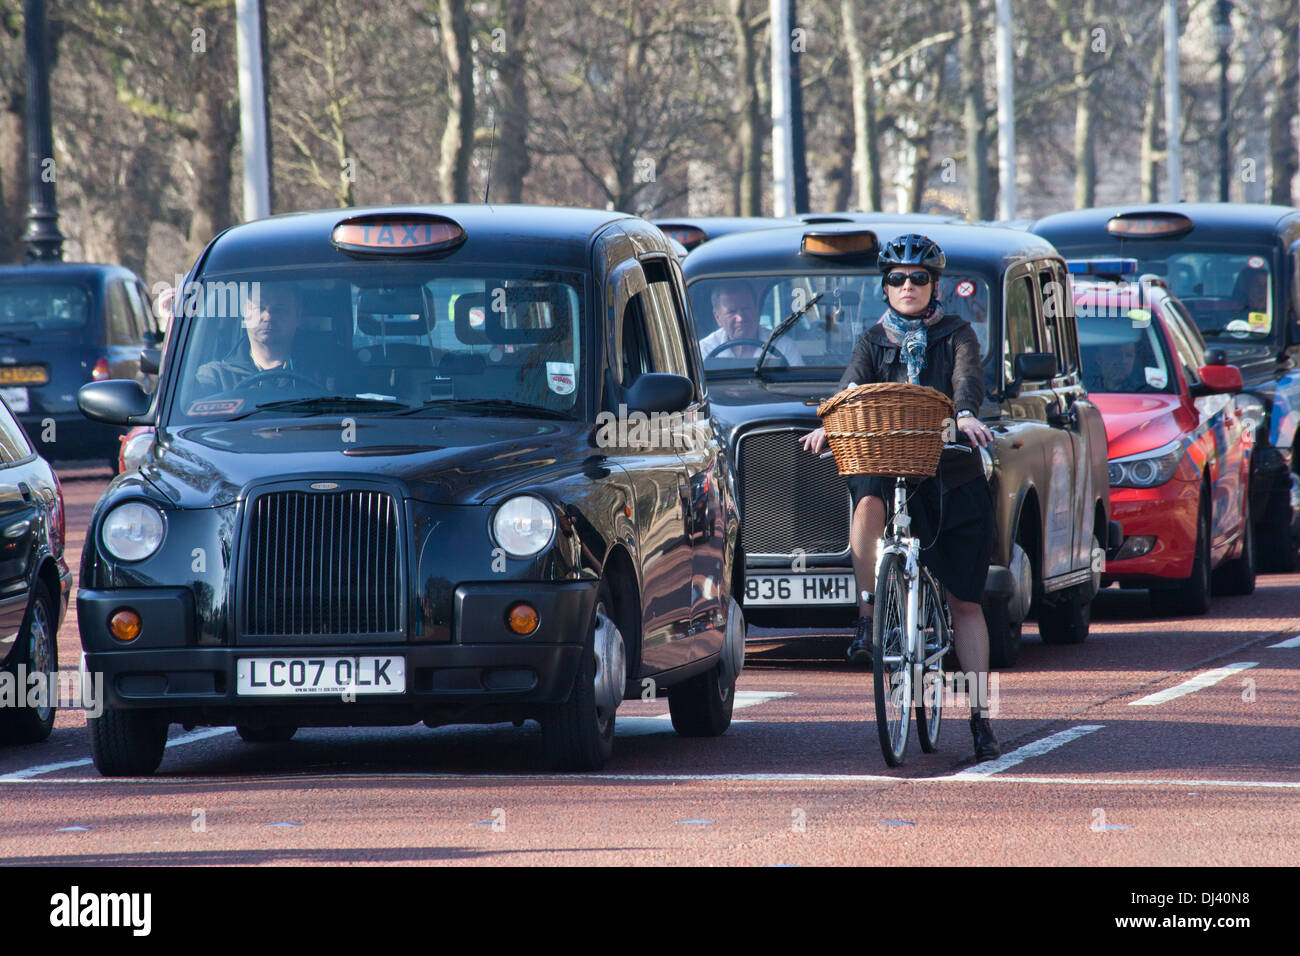 London black taxi cab in line with cyclist Stock Photo